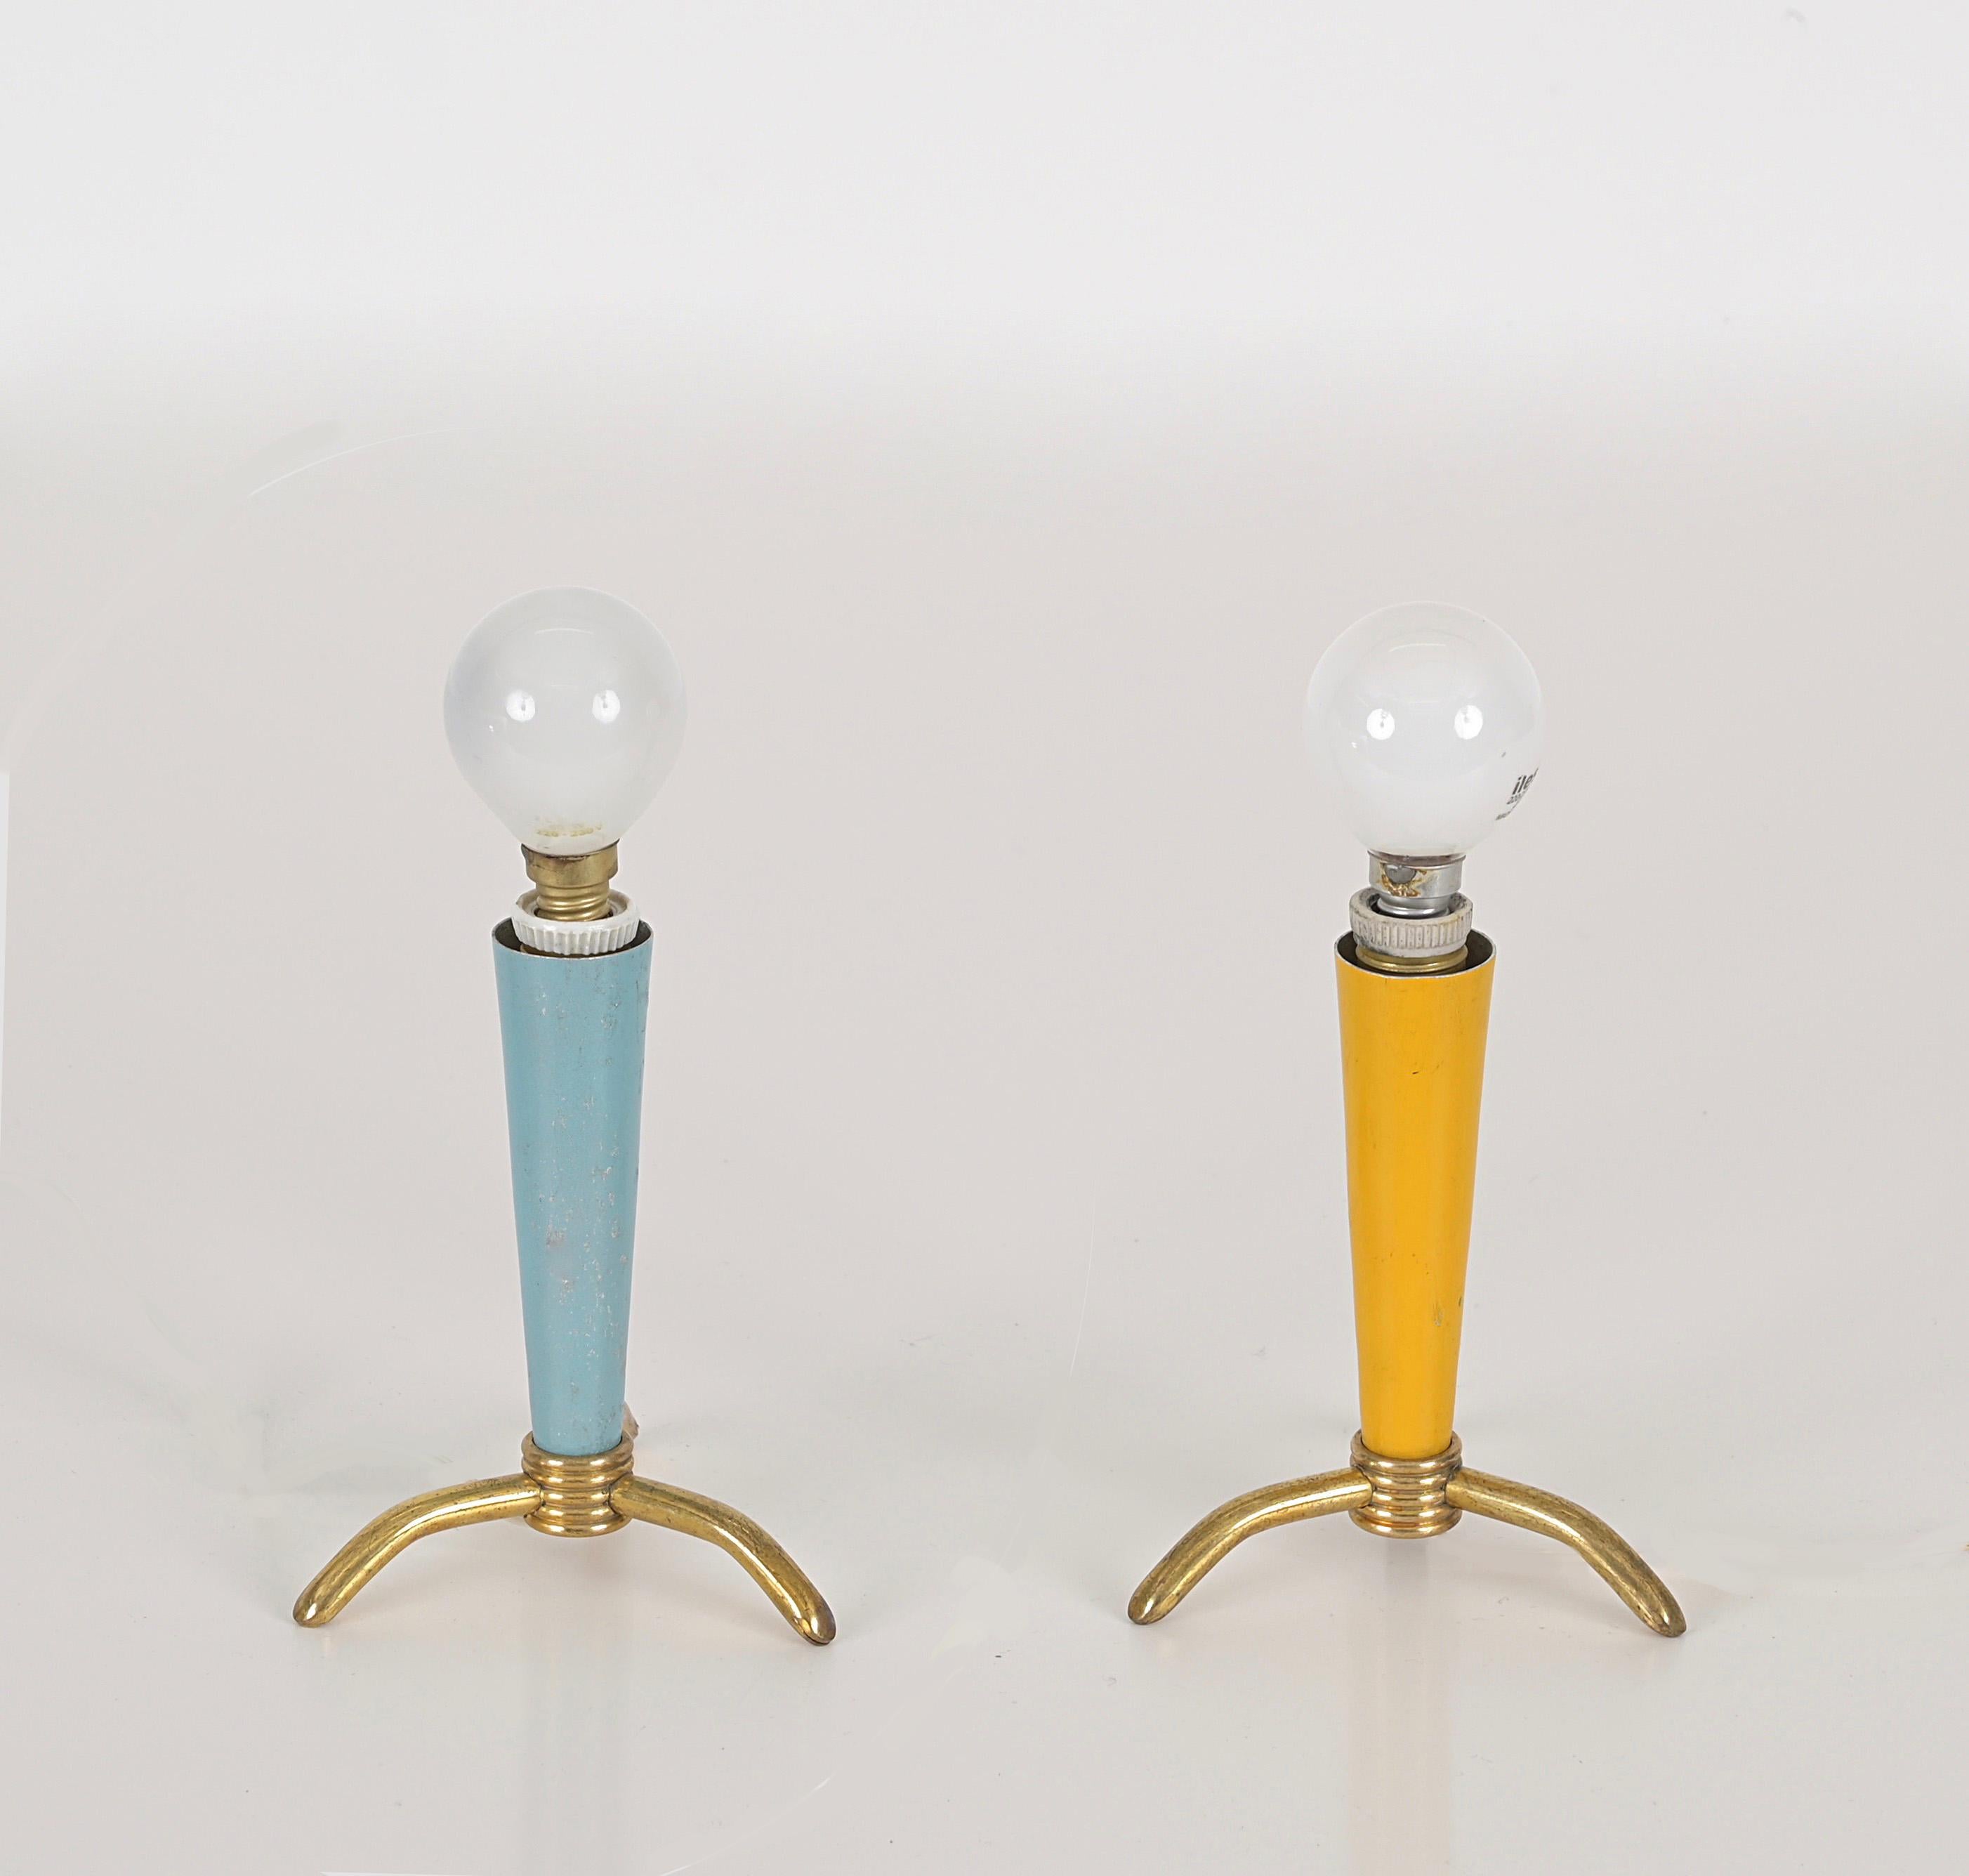 Pairs of Italian Table Lamps in Brass, Yellow and Tiffany Metal, Stilnovo, 1950s For Sale 7